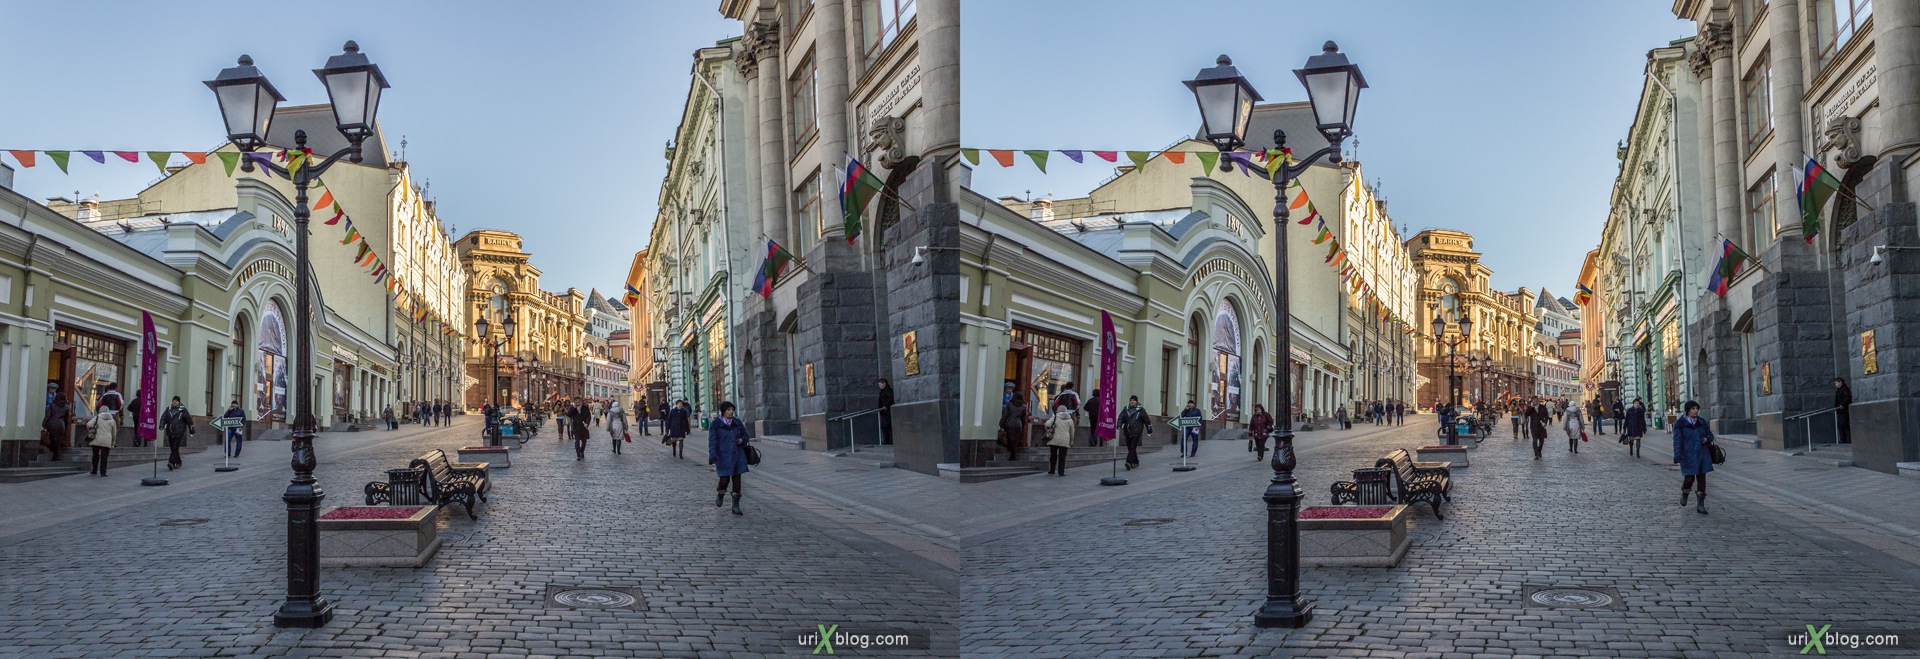 2013, Moscow, Russia, Kuznetsky most, street, new pedestrian zone, 3D, stereo pair, cross-eyed, crossview, cross view stereo pair, stereoscopic